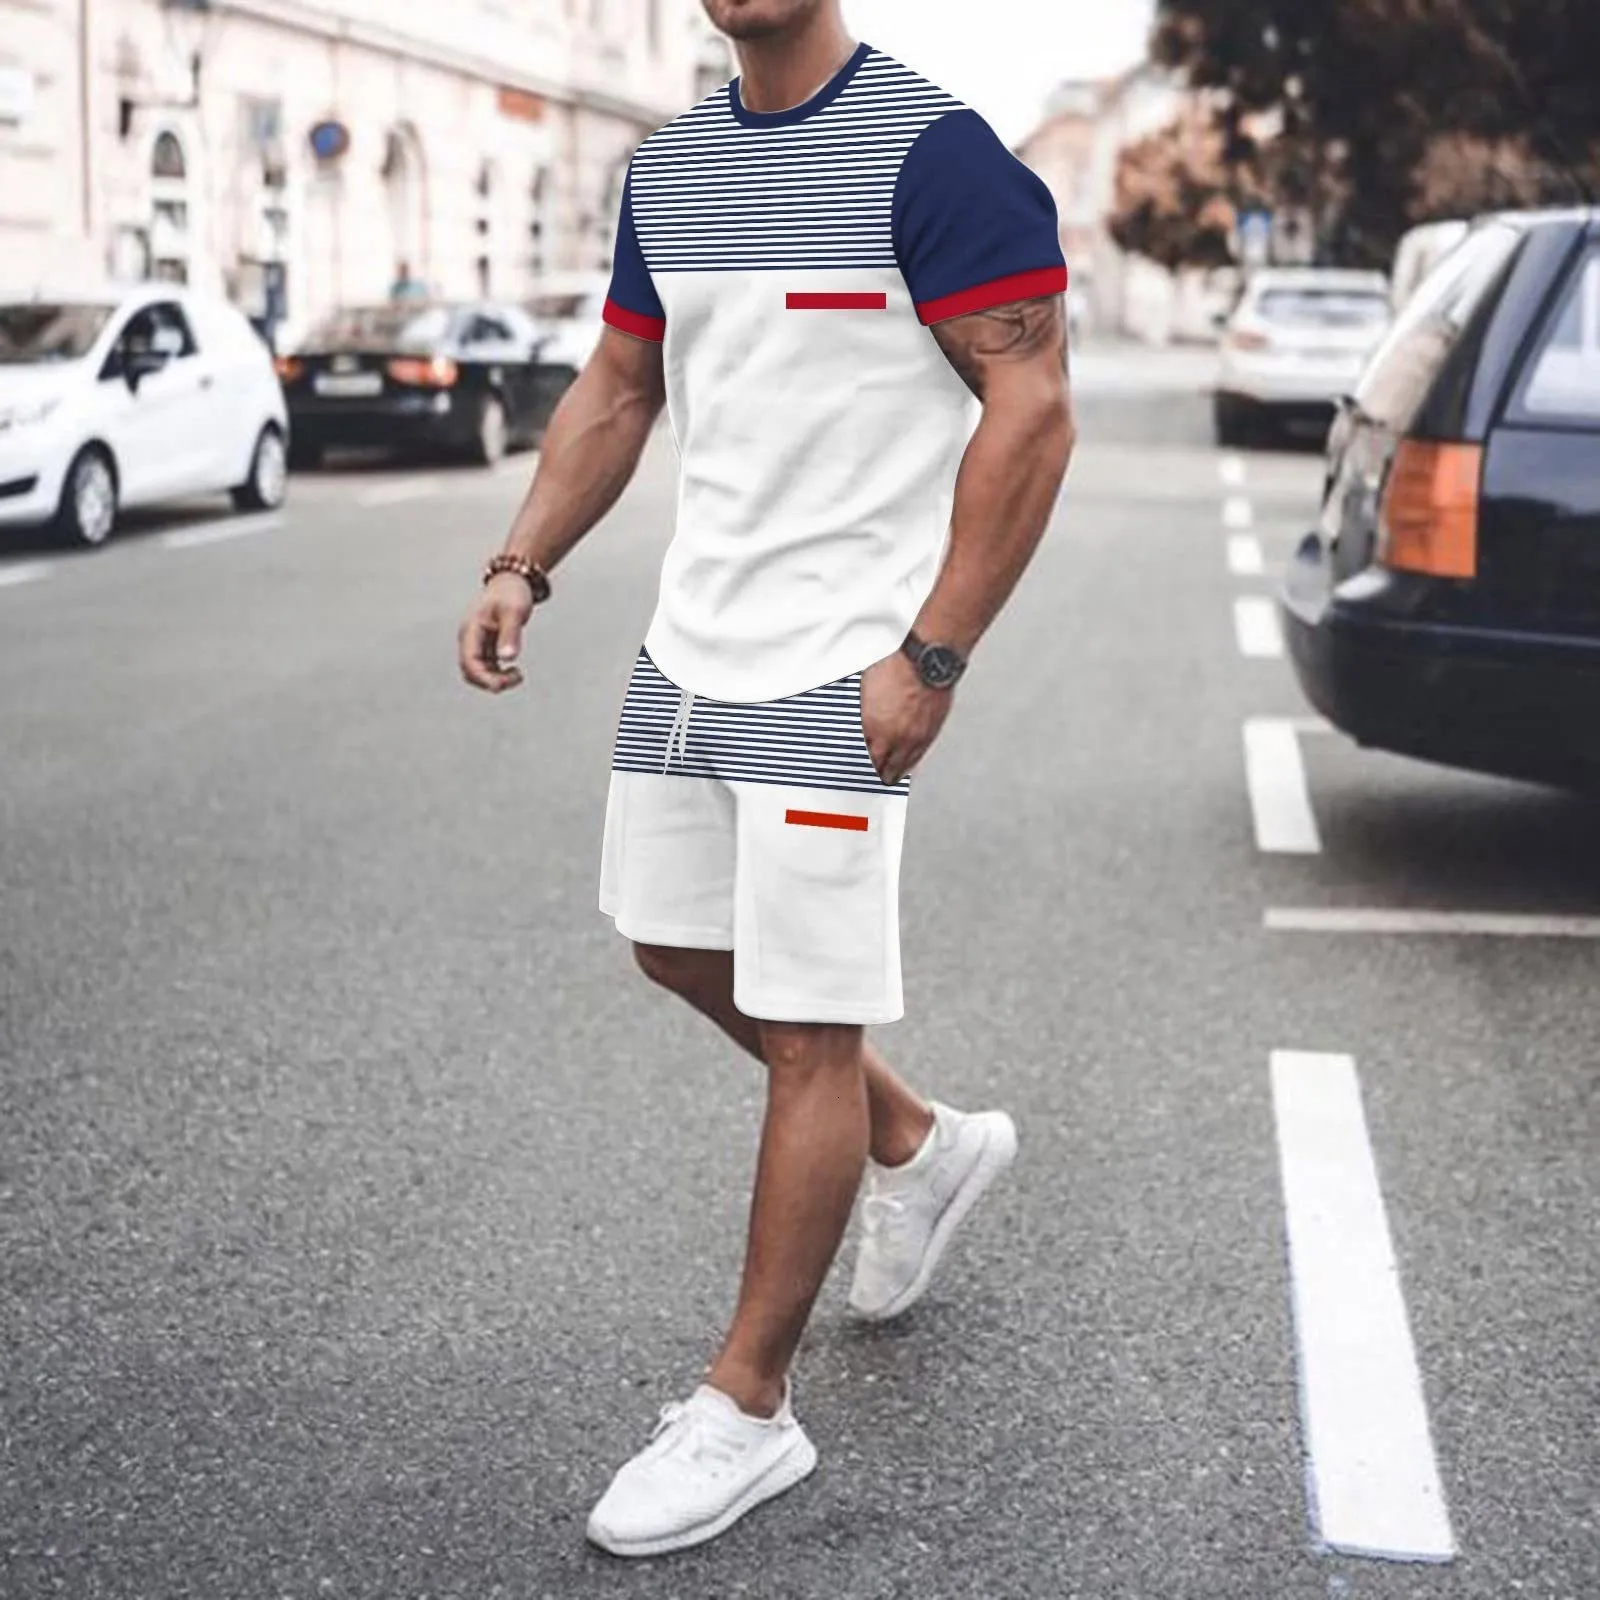 Men's Hoodies Sweatshirts Summer Men's Solid Color Stripe Print Tracksuit 2 Pieces Fashion TShirt Shorts Set Male Casual Streetwear Clothing Outfit 221122